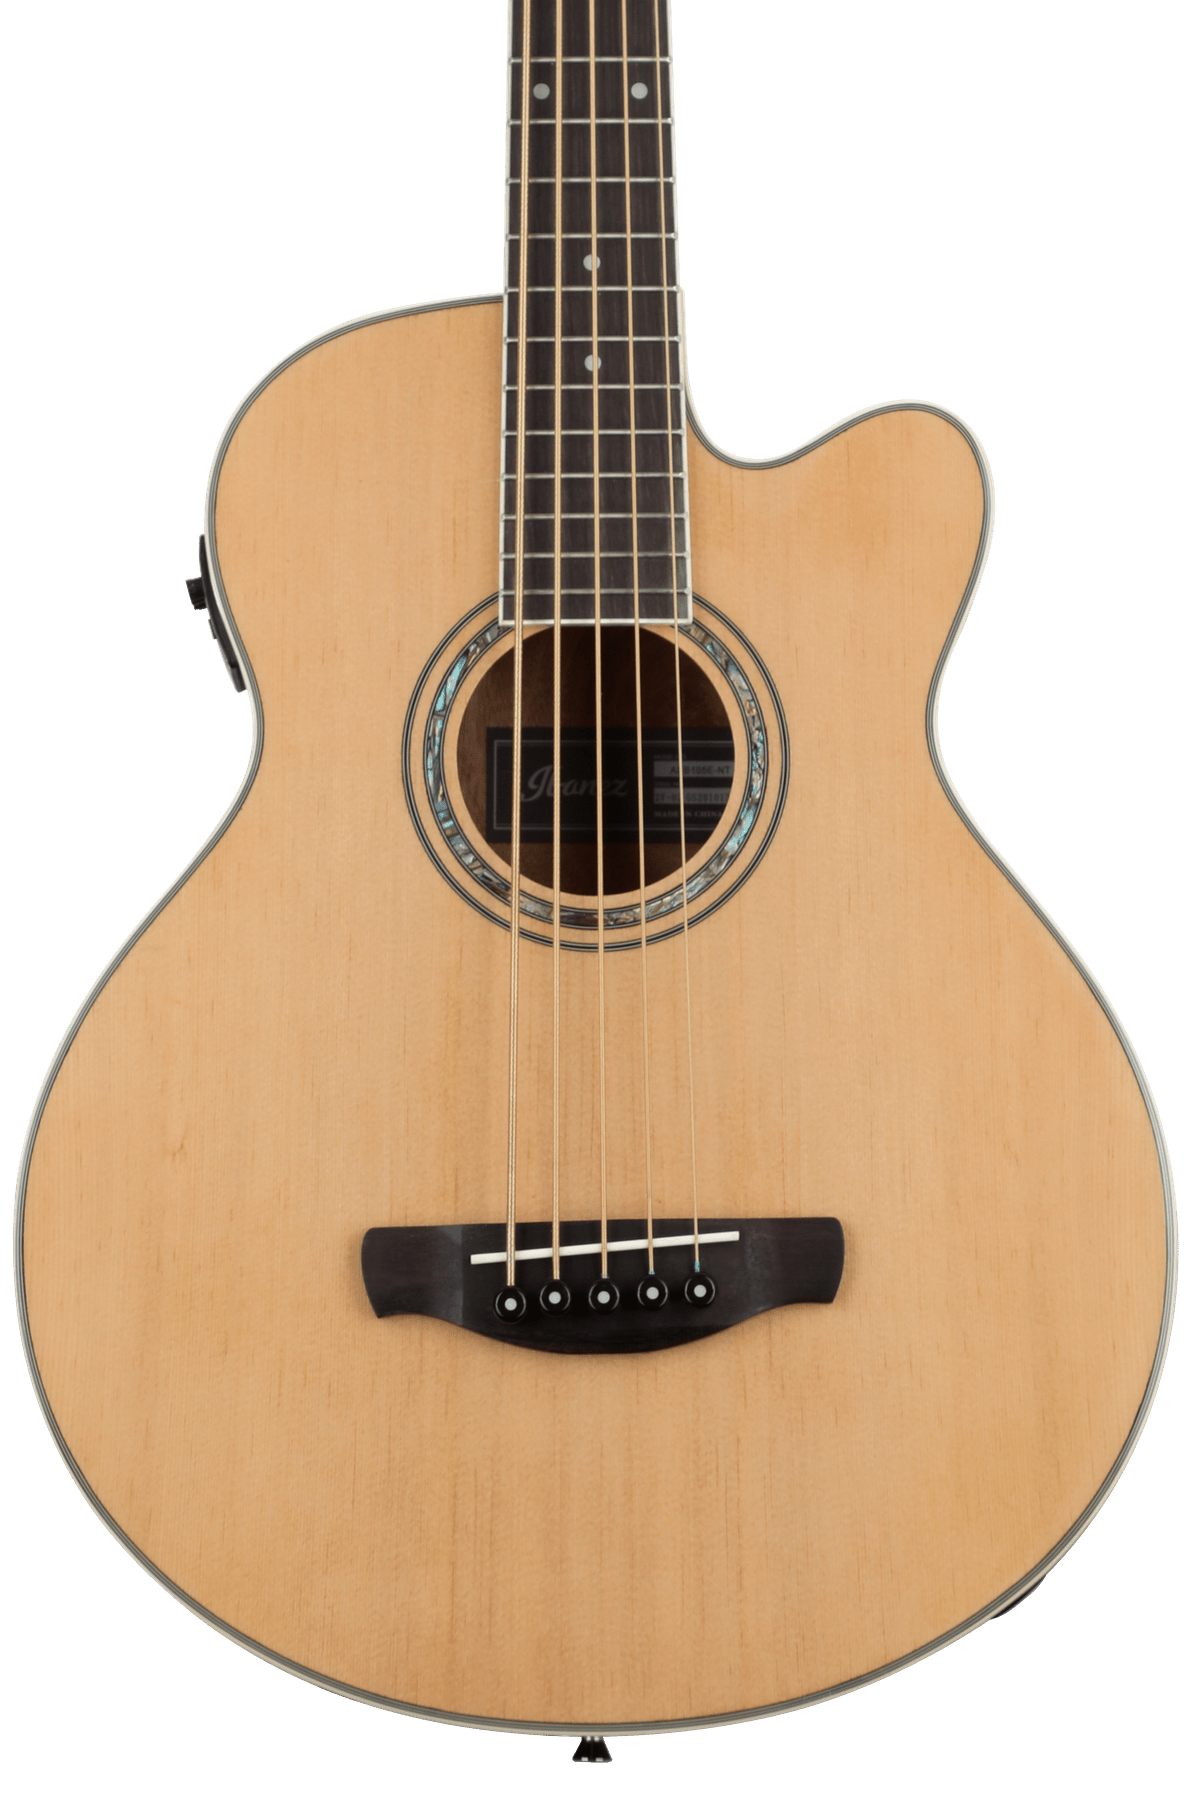 Ibanez　Bass　Acoustic-Electric　AEB105E　High　Reviews　Natural　Gloss　Sweetwater